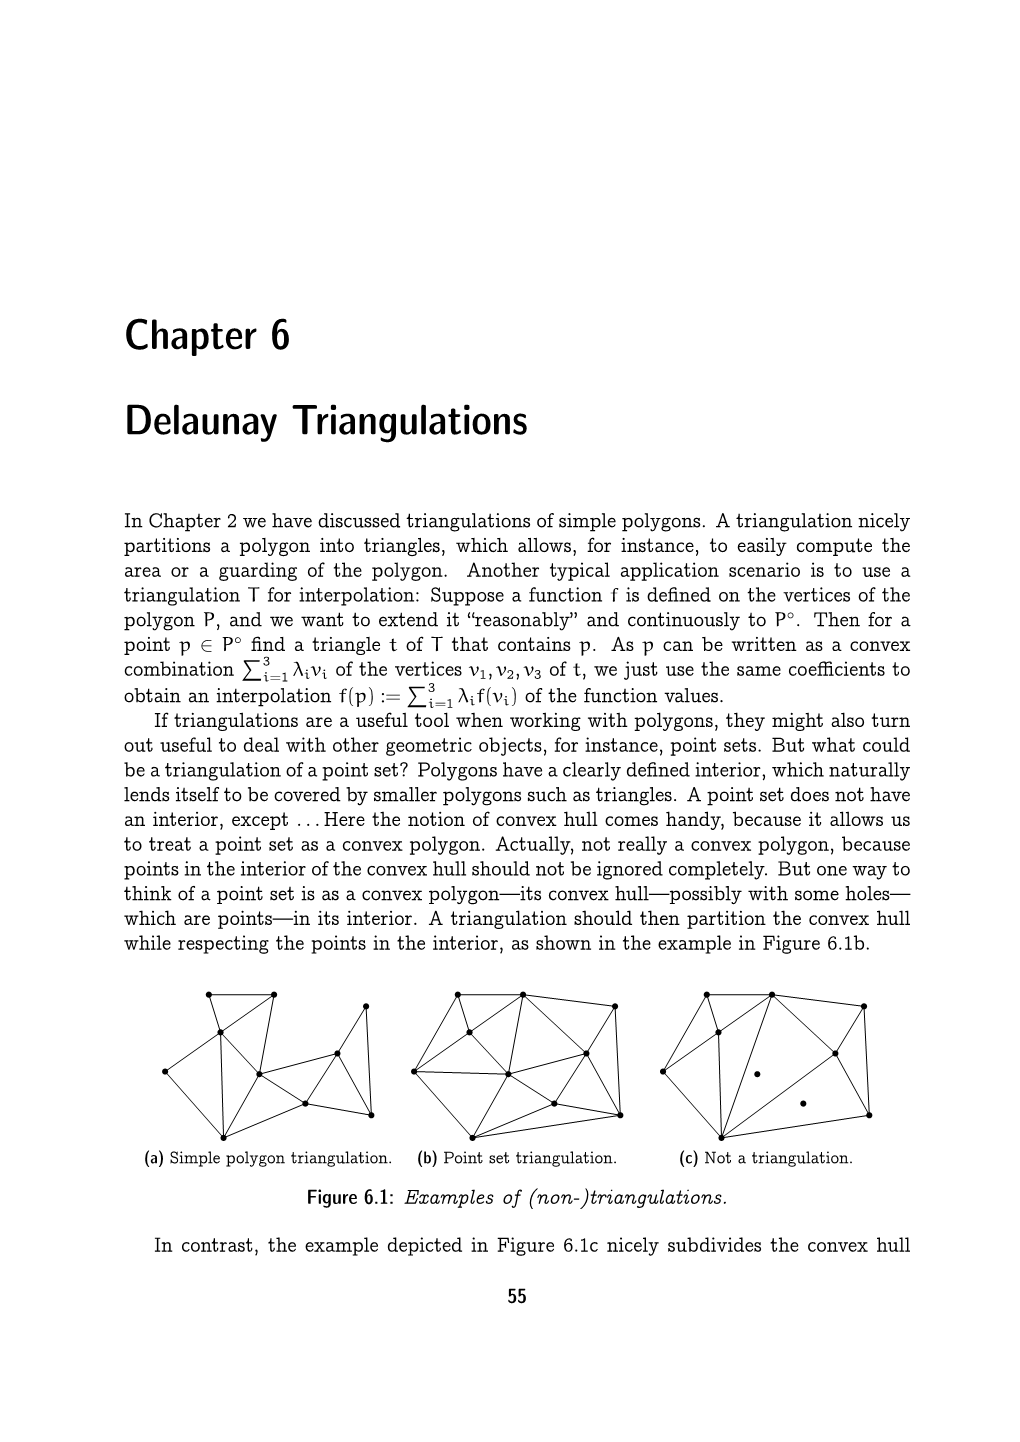 Chapter 6 Delaunay Triangulations